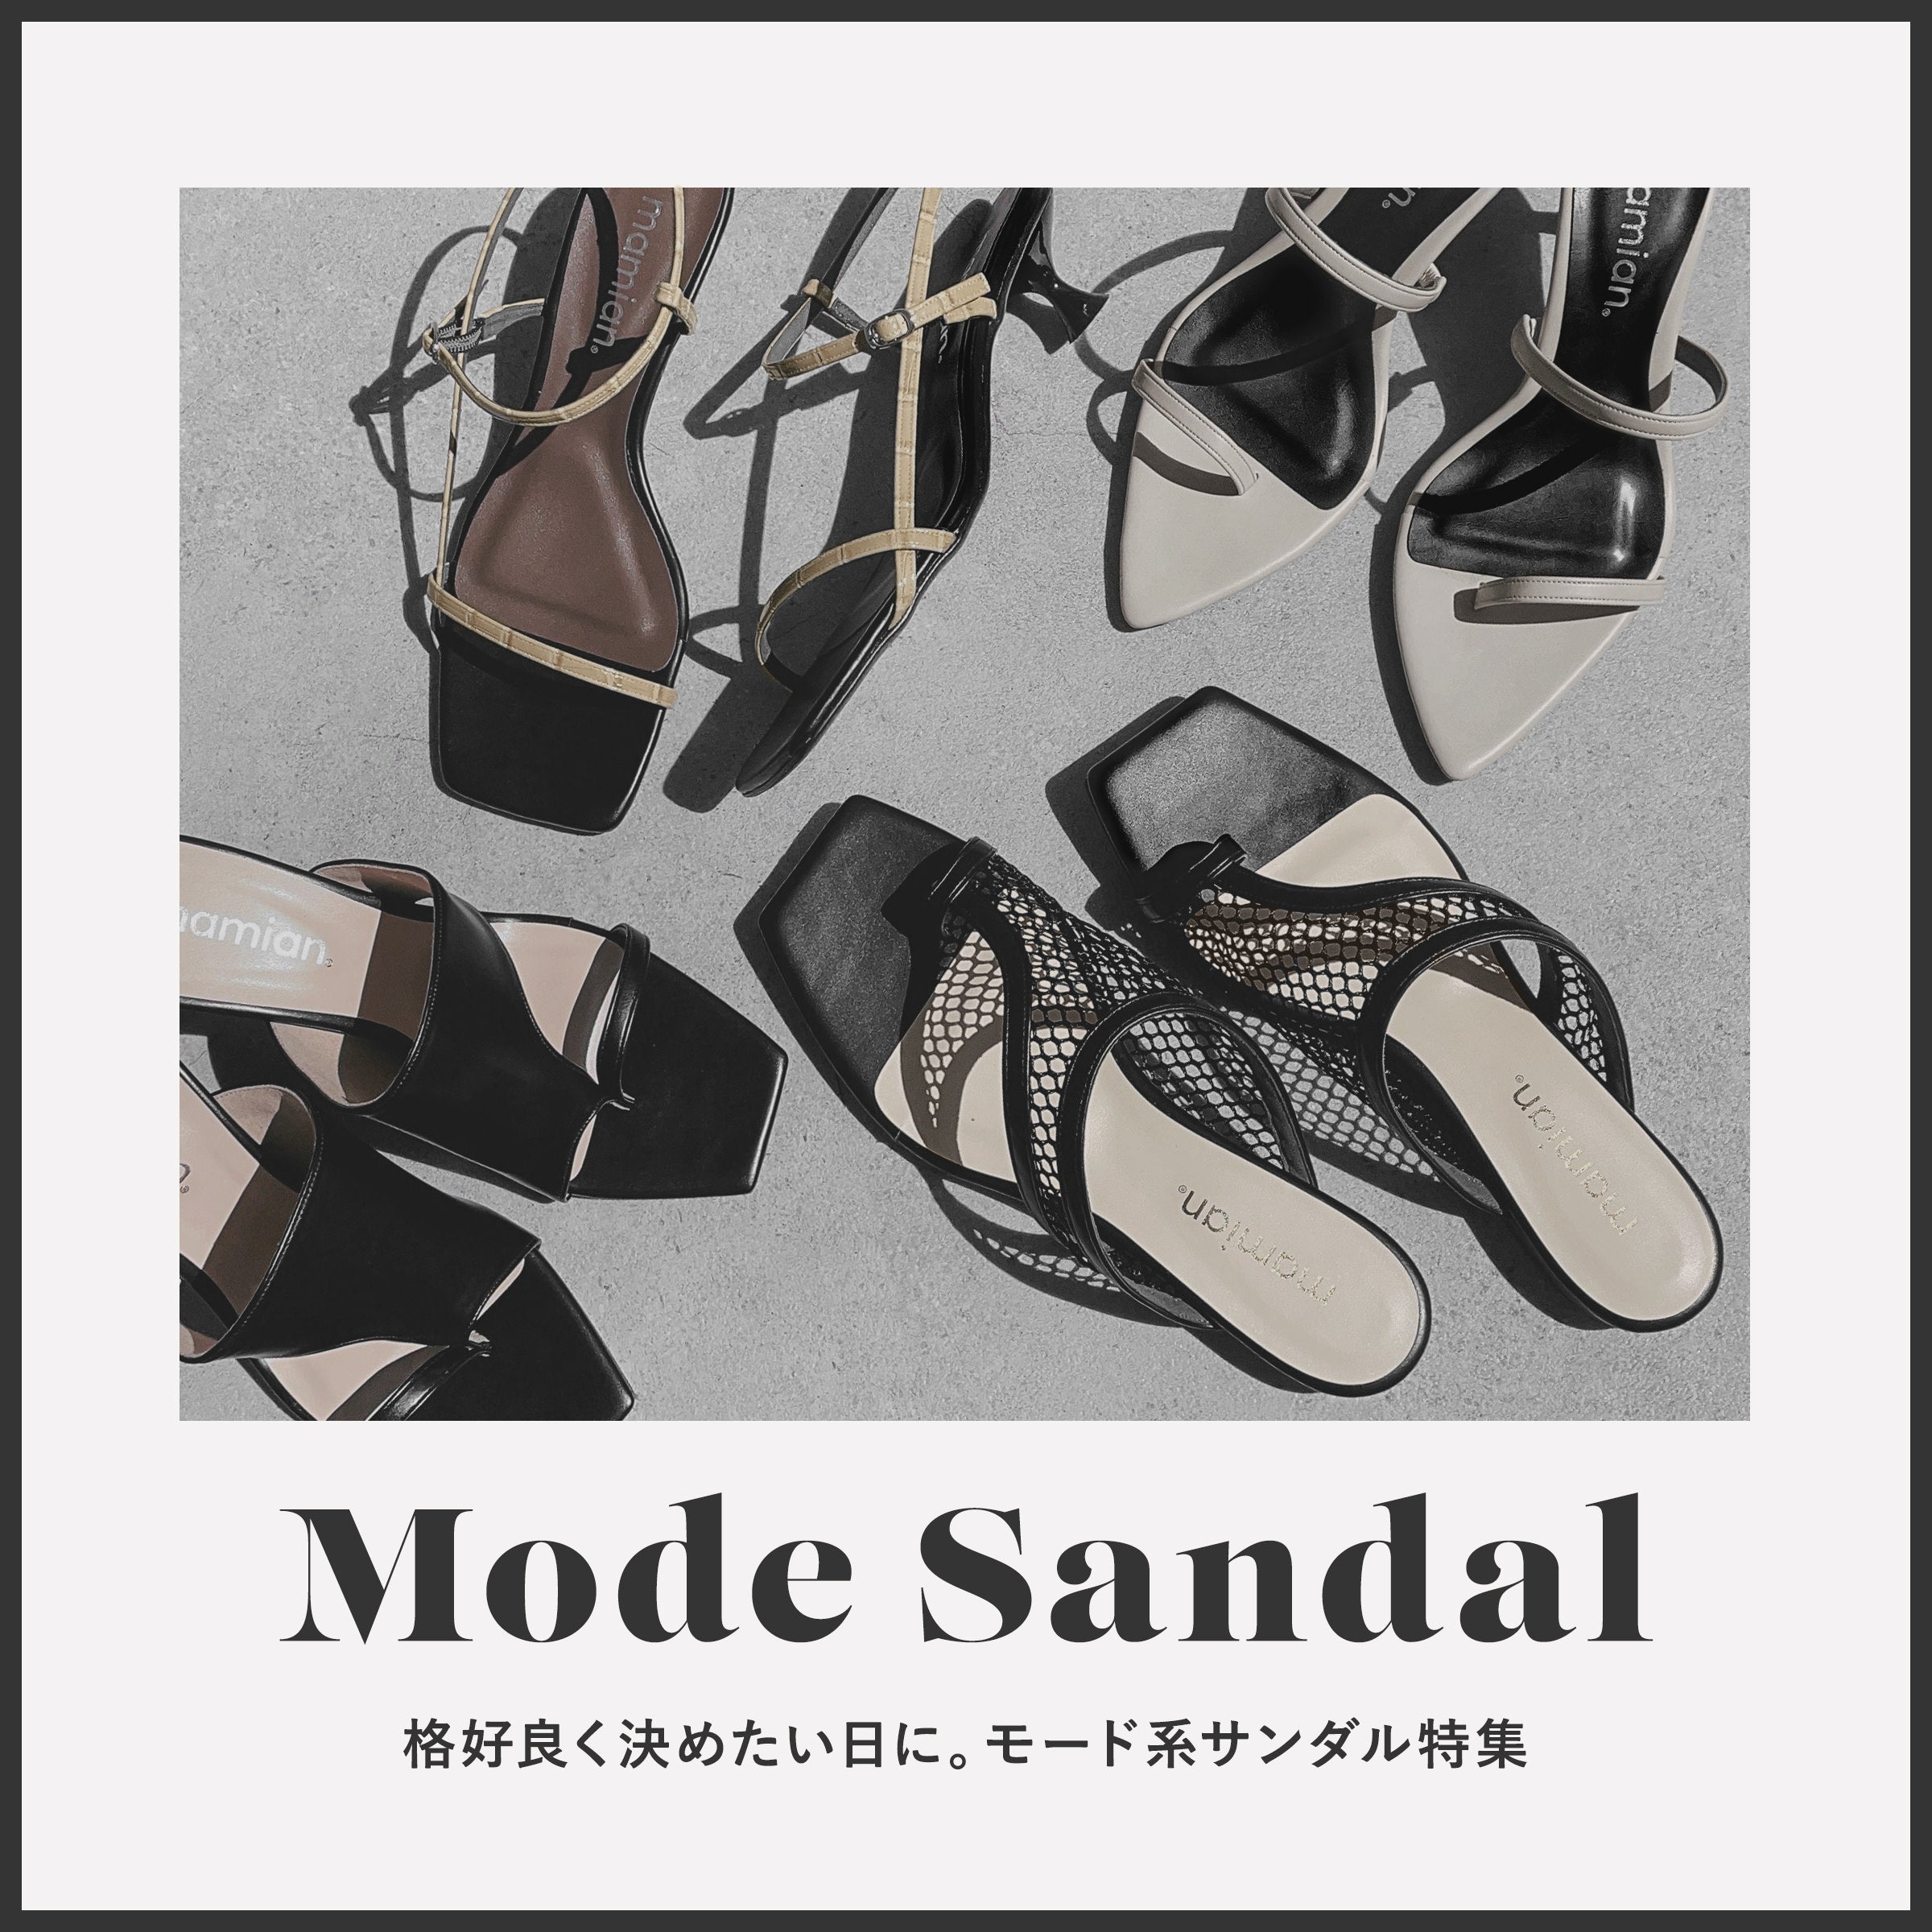 On the day when you want to look cool! Mode system sandals special feature